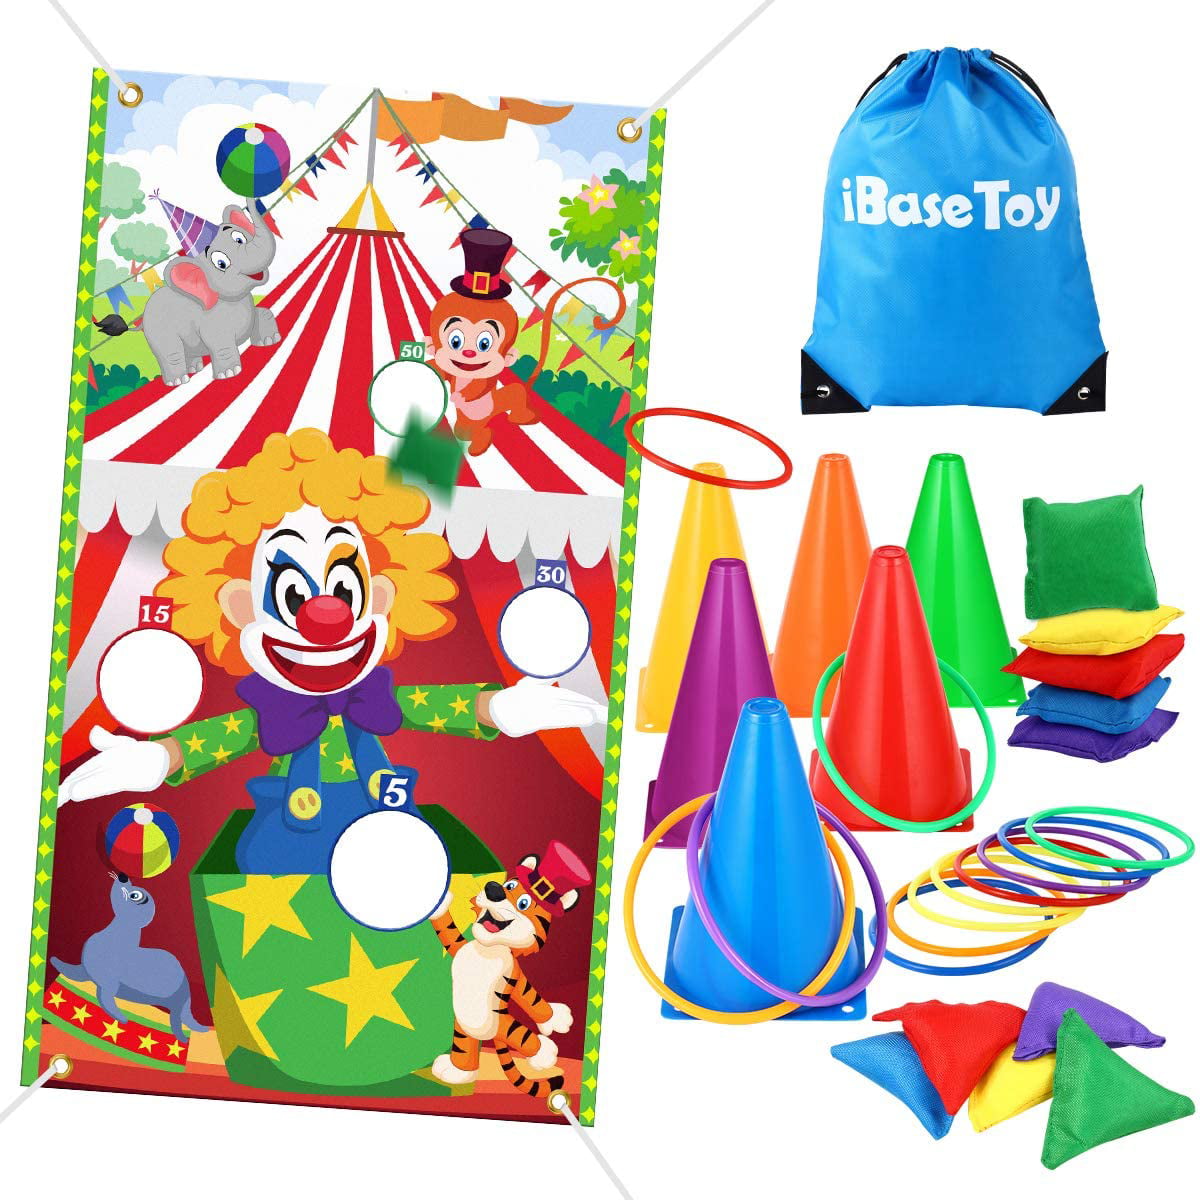 Indoor Outdoor Game Party Supplies for Kids in Family Games,Birthday Party,Carnival Games xigua Pastel Colors Marble Toss Games Banner with 6 Bean Bags 